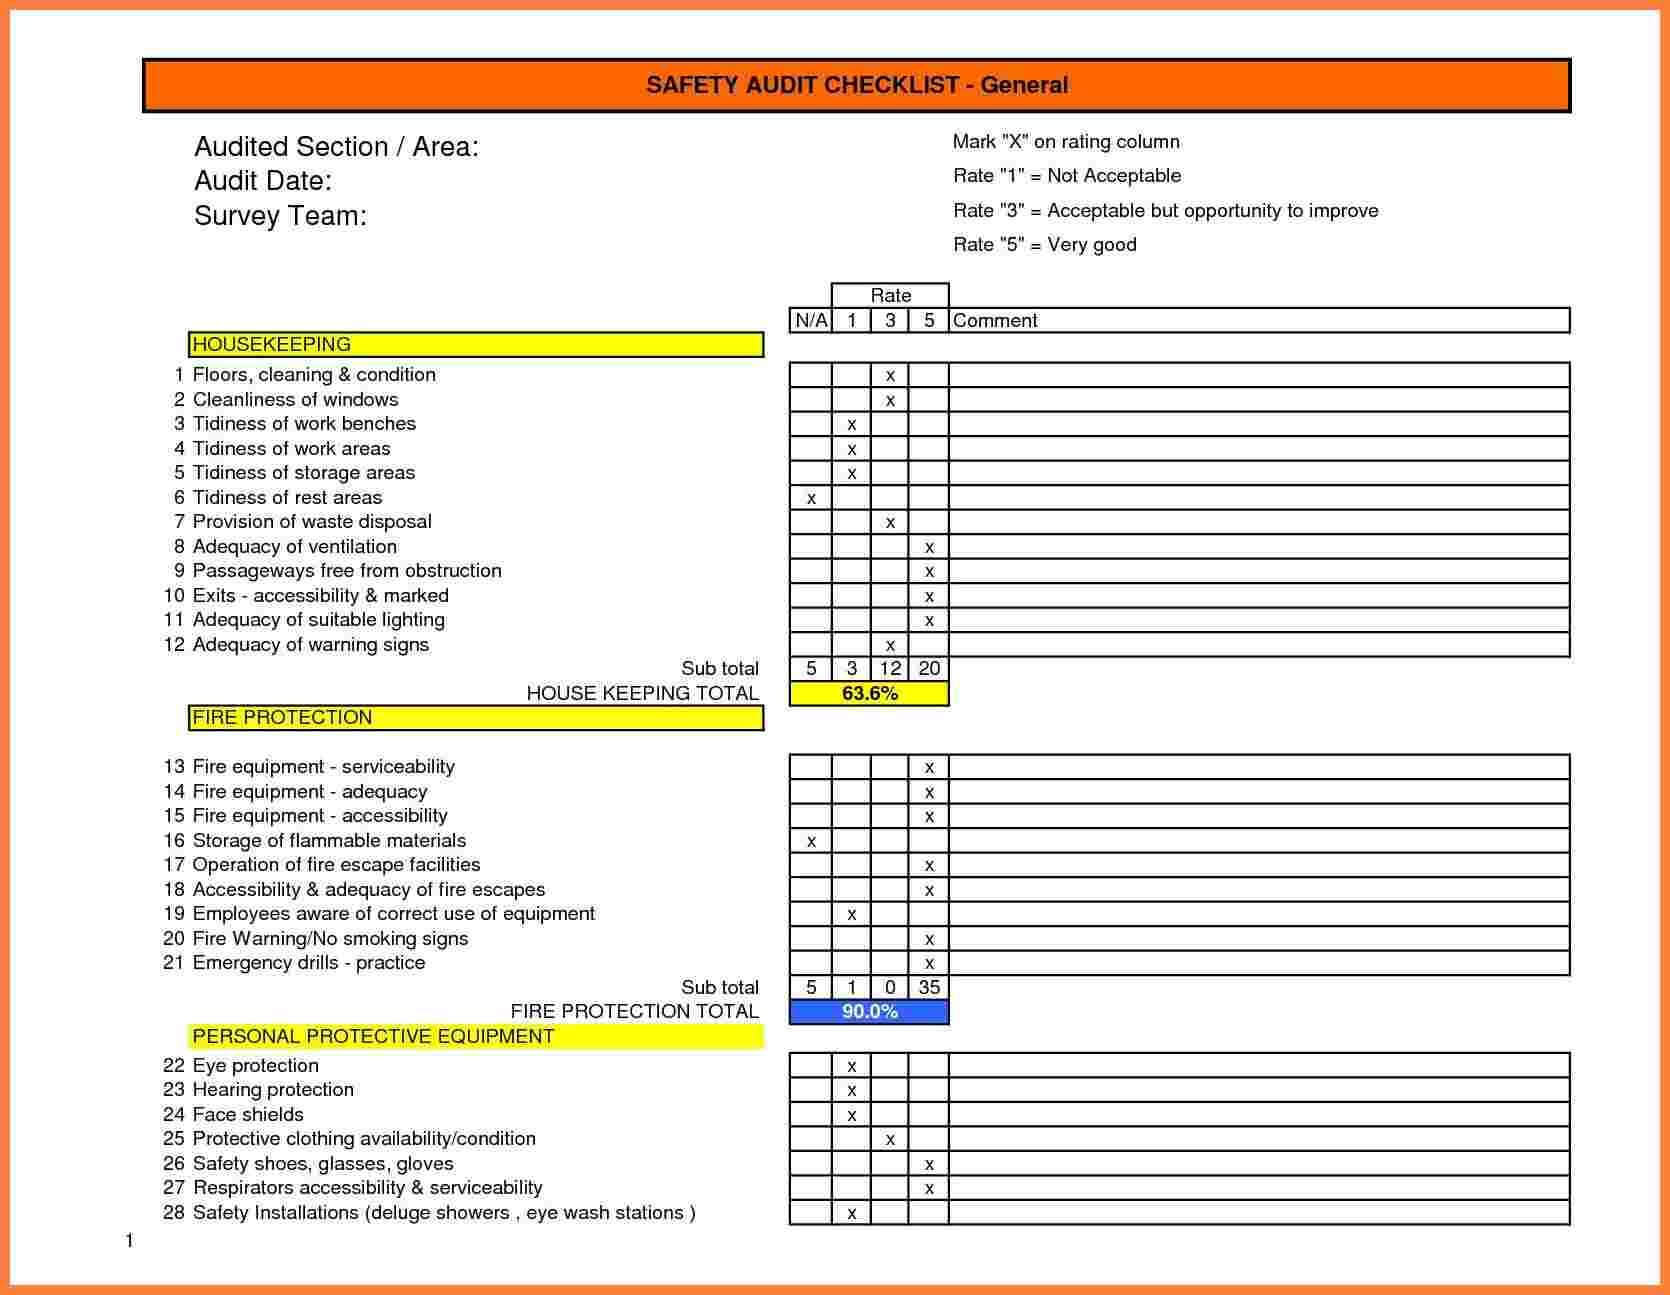 Image Result For Warehouse Health And Safety Audit Form With Regard To Safety Analysis Report Template